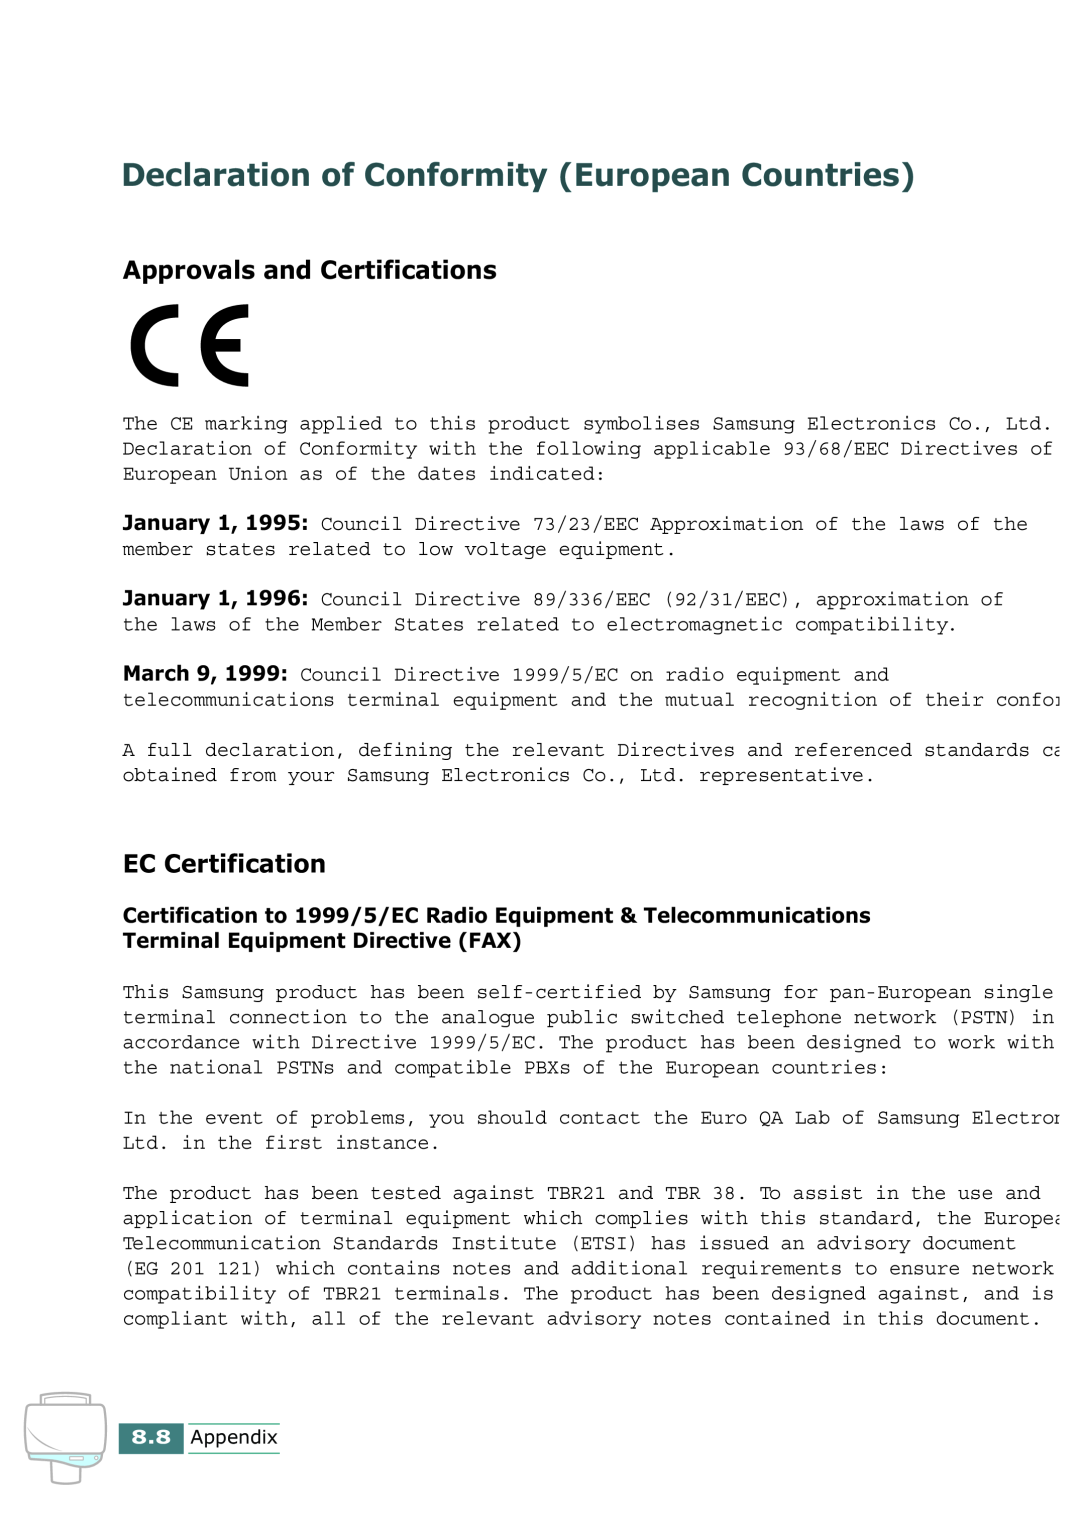 Samsung SCX-1100 manual Declaration of Conformity European Countries, Approvals and Certifications, EC Certification 